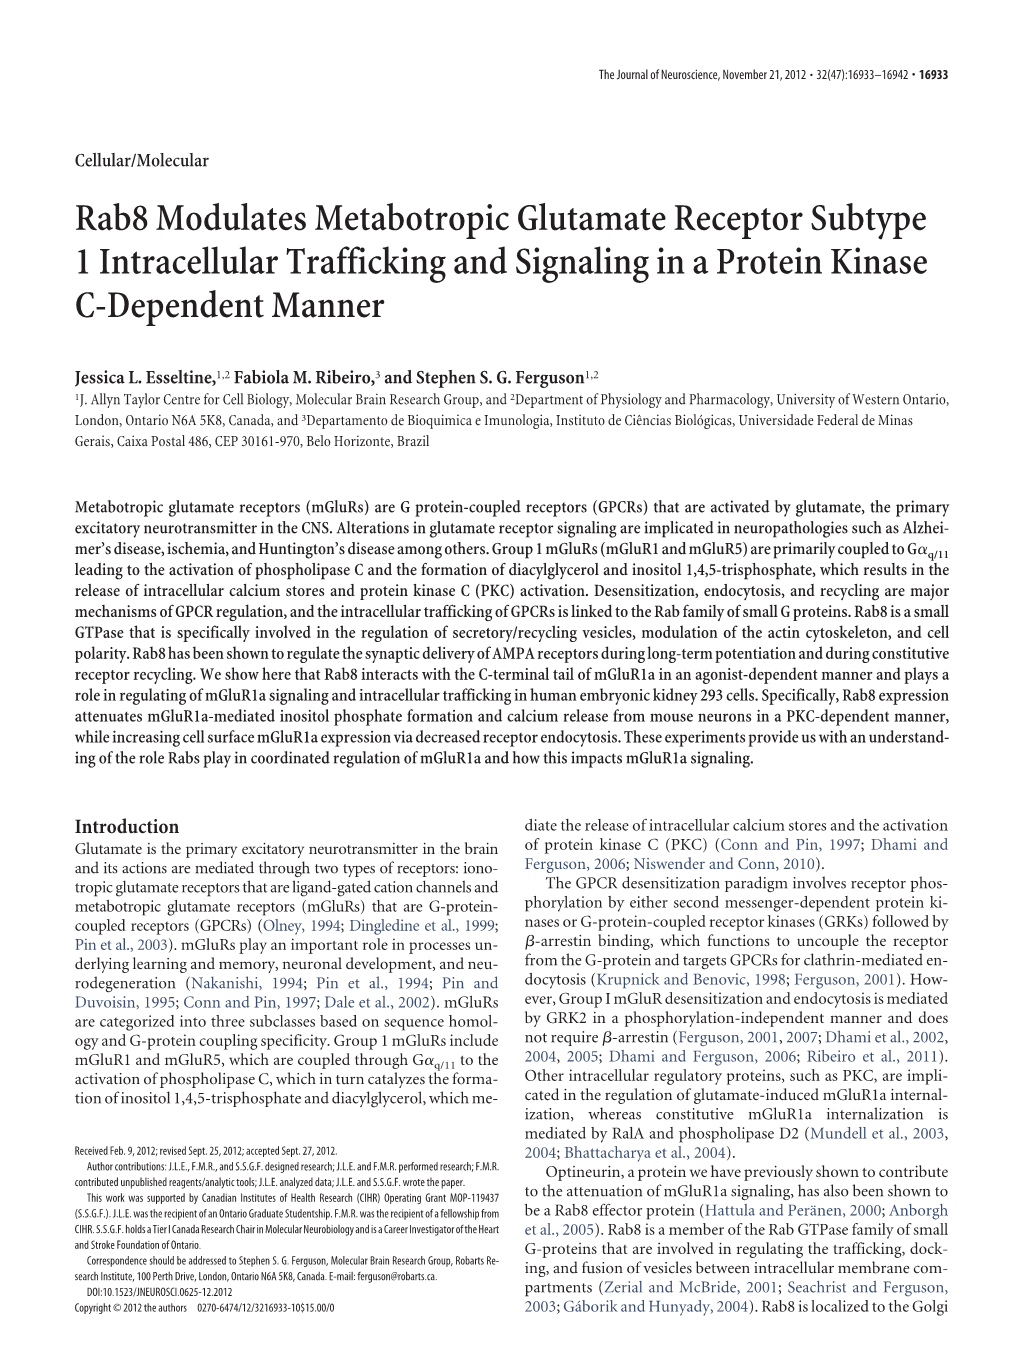 Rab8 Modulates Metabotropic Glutamate Receptor Subtype 1 Intracellular Trafficking and Signaling in a Protein Kinase C-Dependent Manner